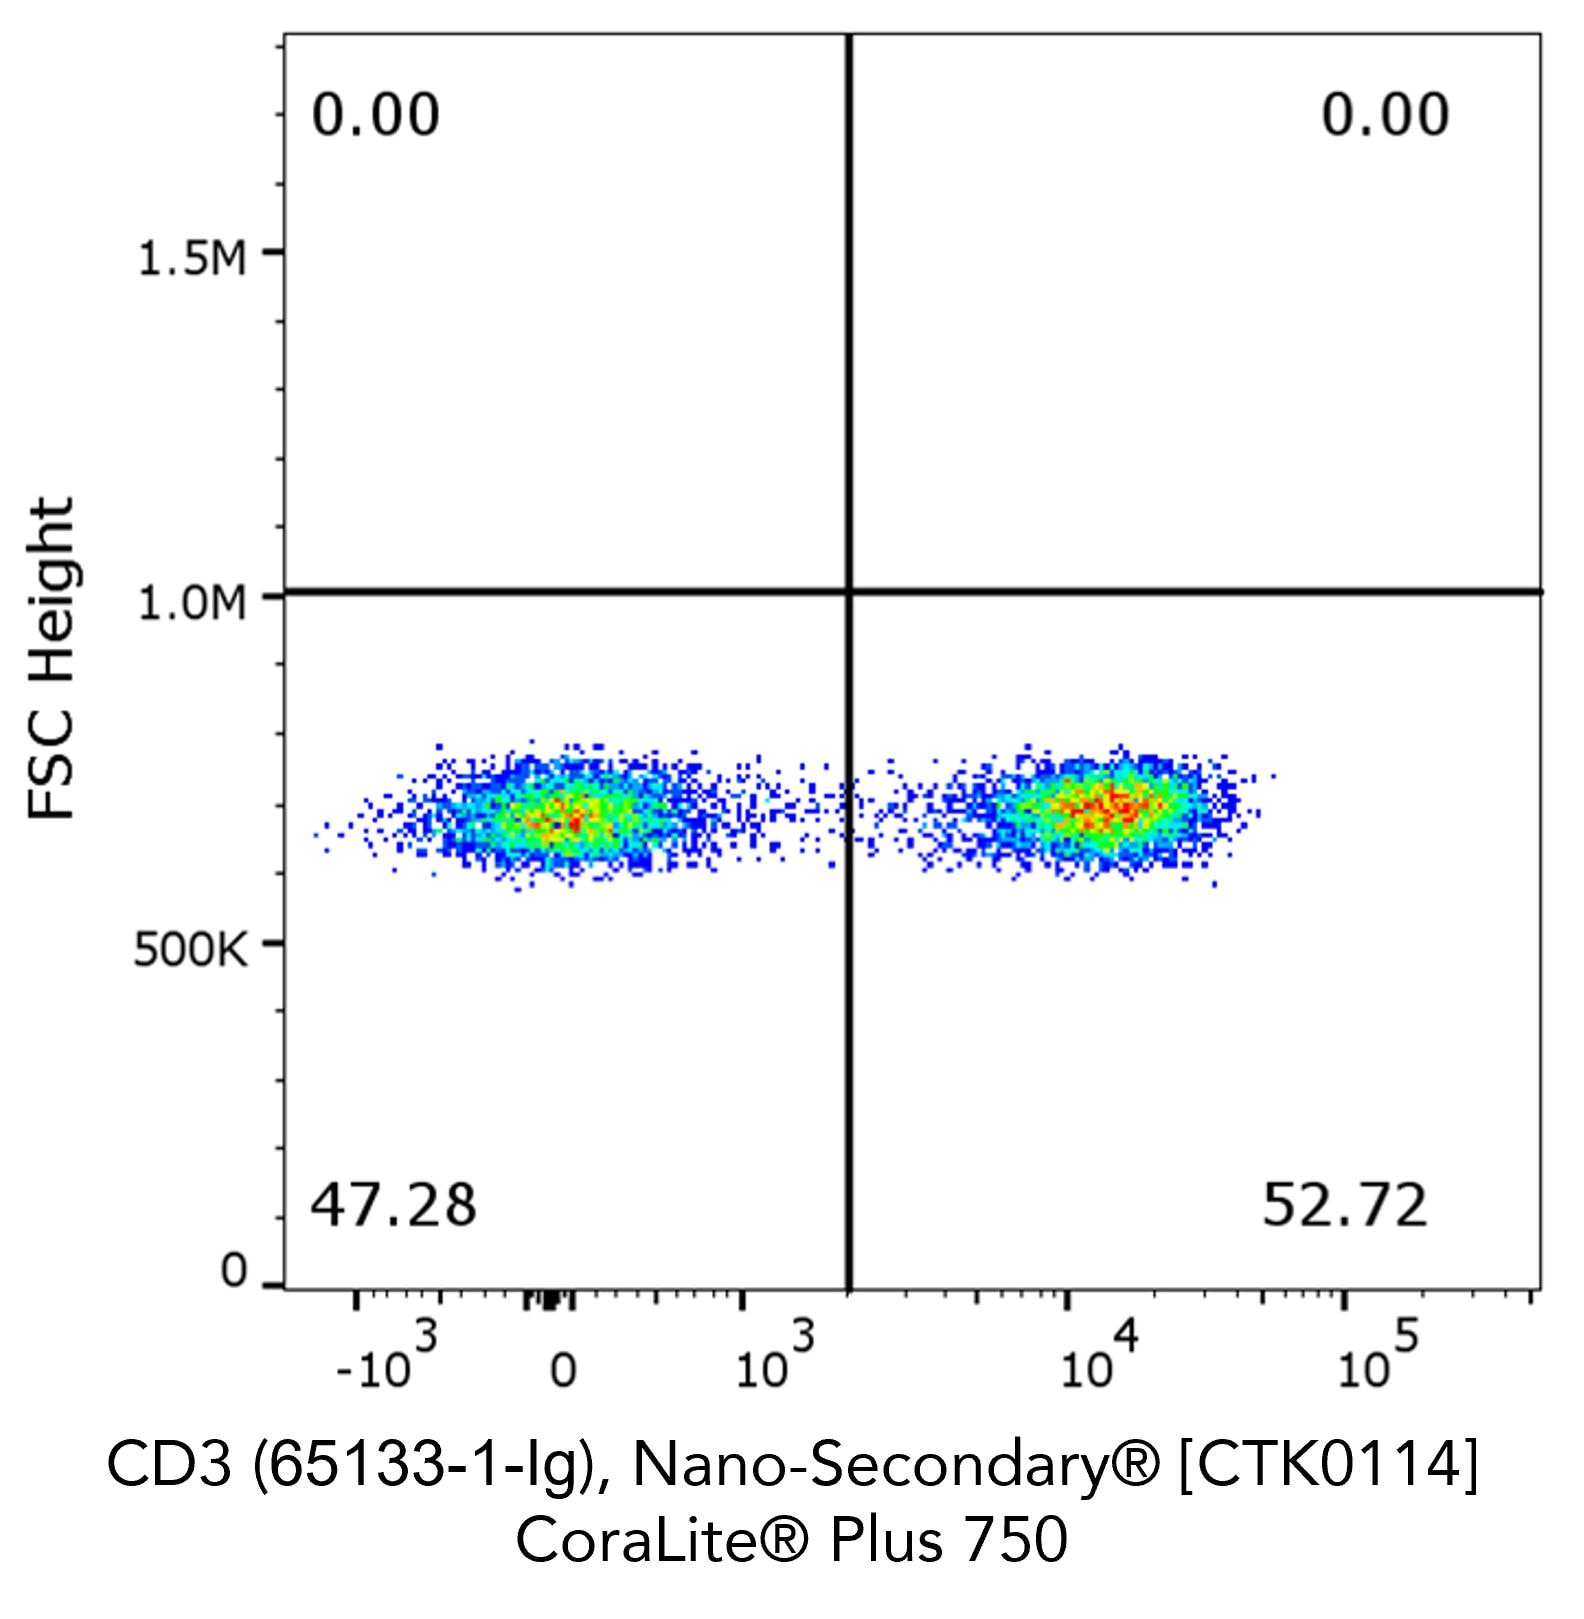 Flow cytometry analysis of 1X10^6 human peripheral blood mononuclear cells (PBMCs) stained with anti-human CD3 (clone OKT3, 65133-1-Ig) and Nano-Secondary® alpaca anti-mouse IgG2a, recombinant VHH, CoraLite® Plus 750.